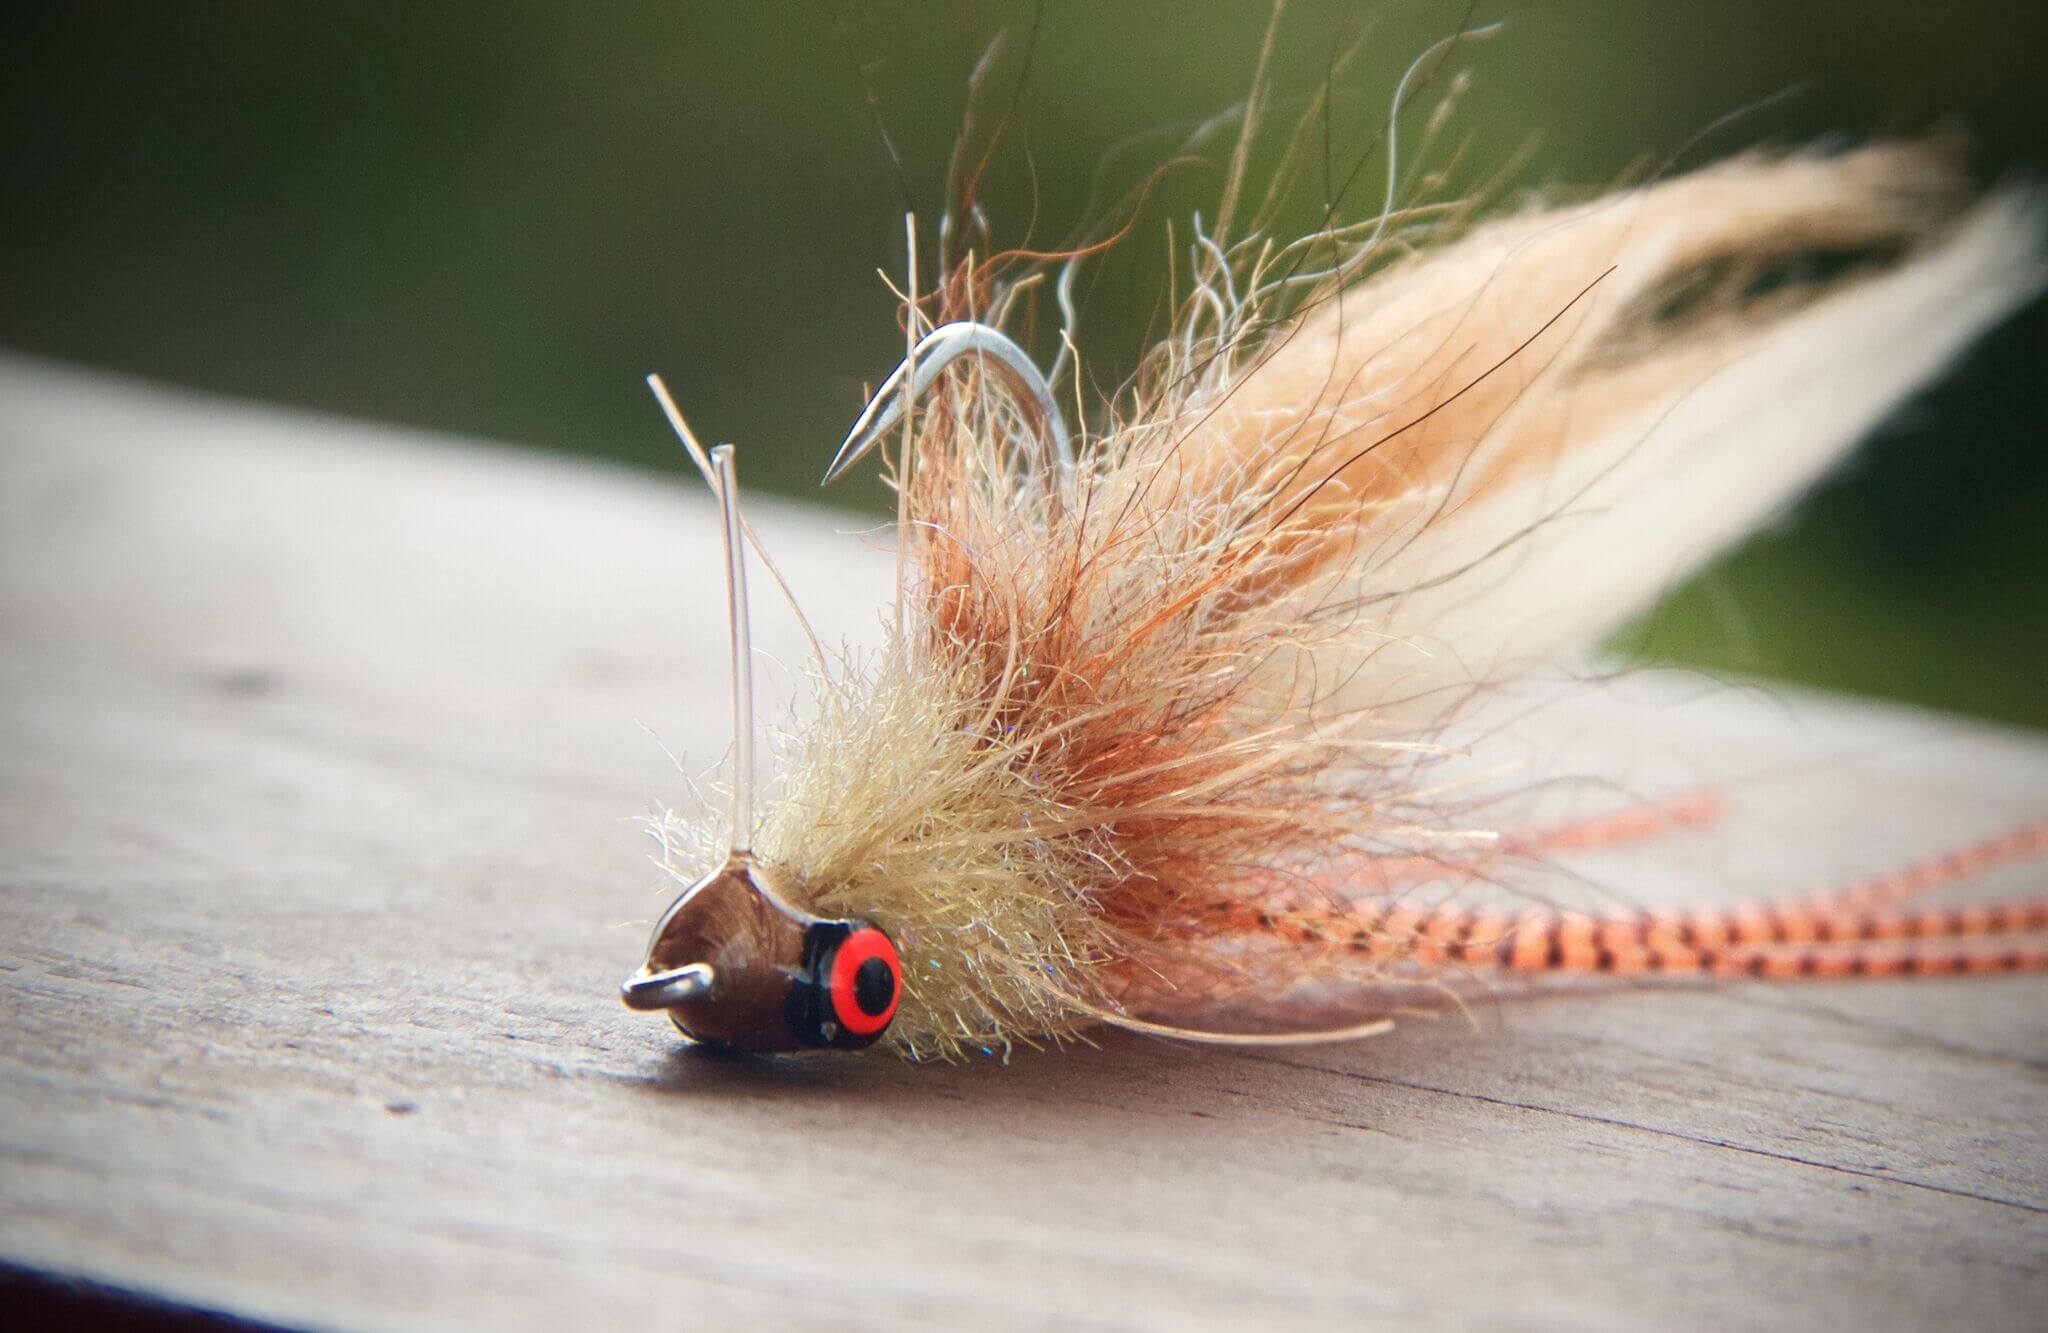 fly tying in tail fly fishing magazine - the voice of saltwater fly fishing - fly tying for saltwater flies